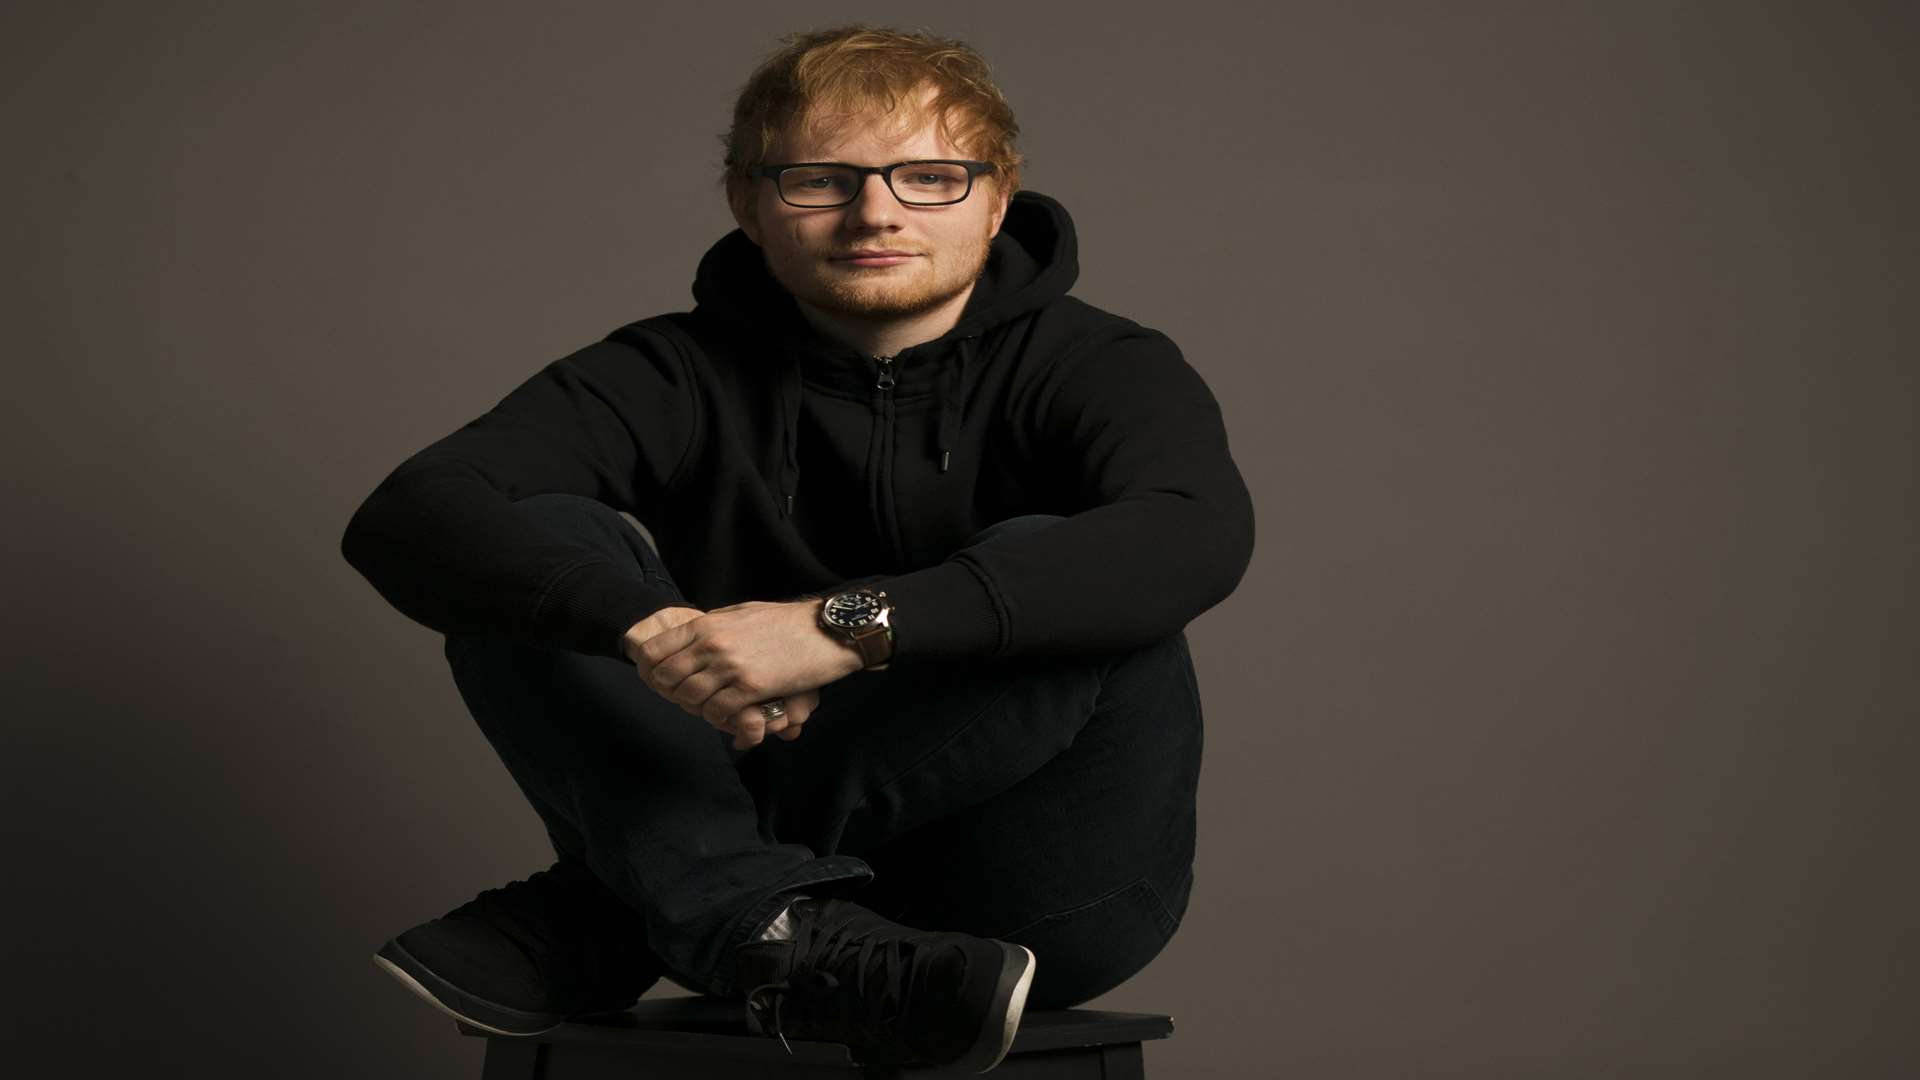 Ed will be on kmfm this coming Monday